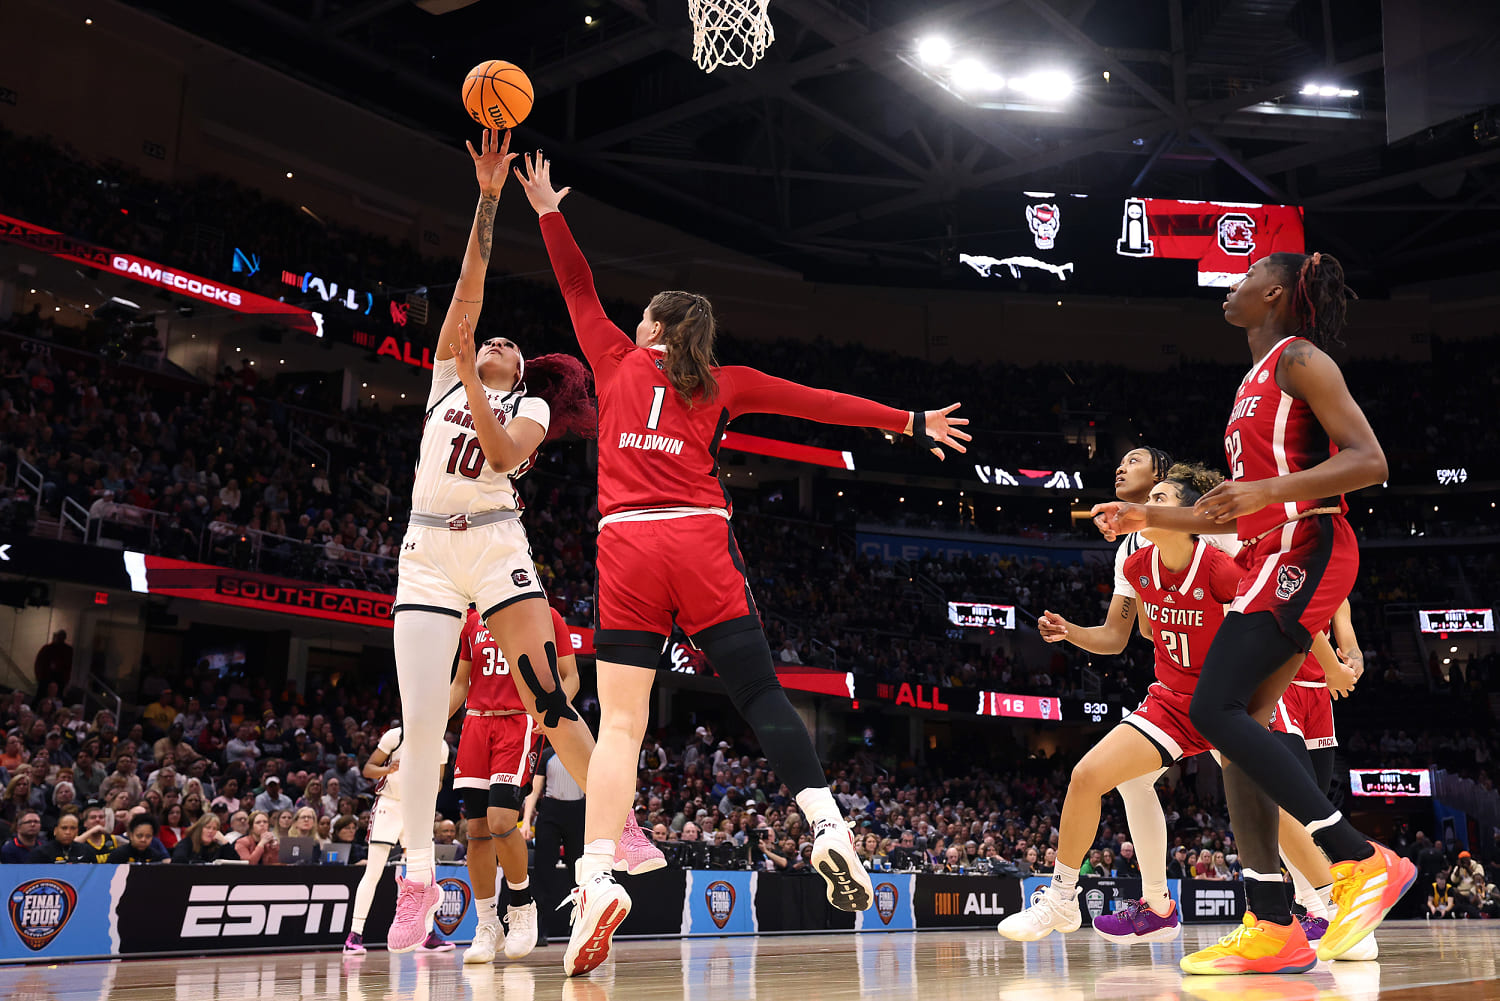 South Carolina opens up big lead over NC State in third quarter of Final Four matchup